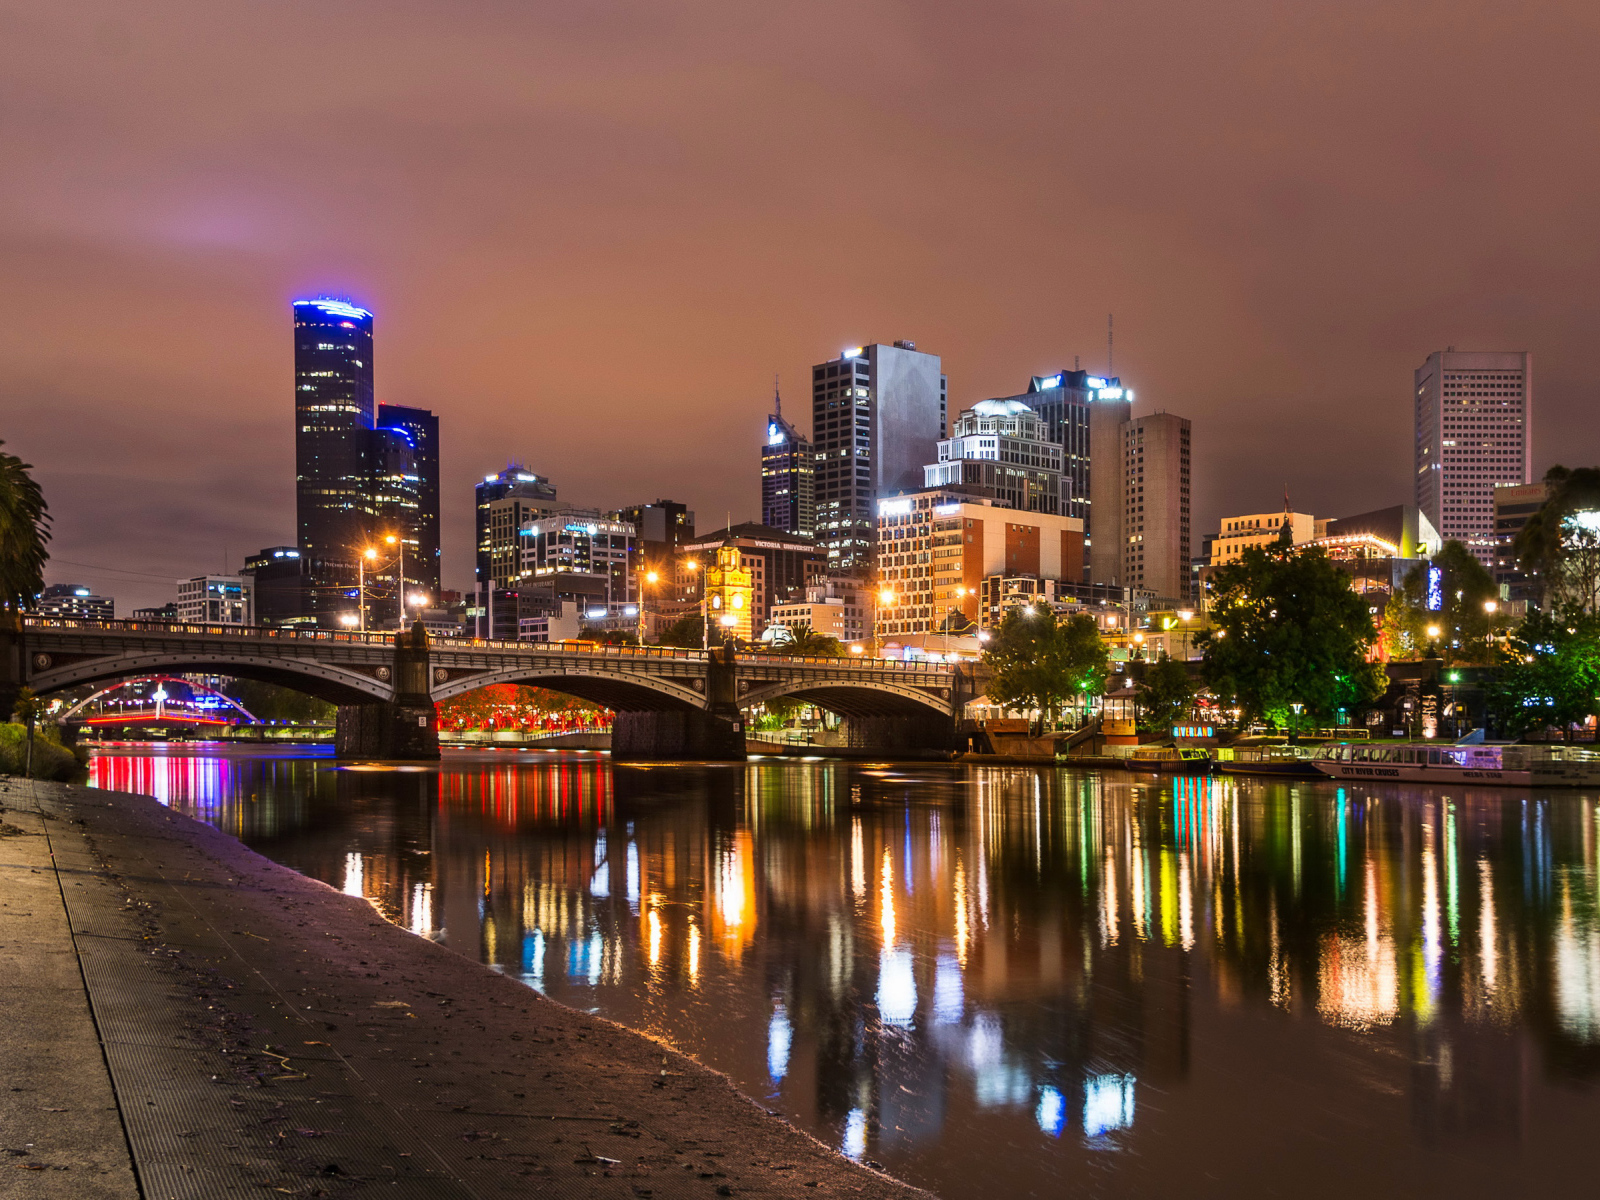 The lights of the night skyscrapers of the city of Melbourne are reflected in the water channel. Australia